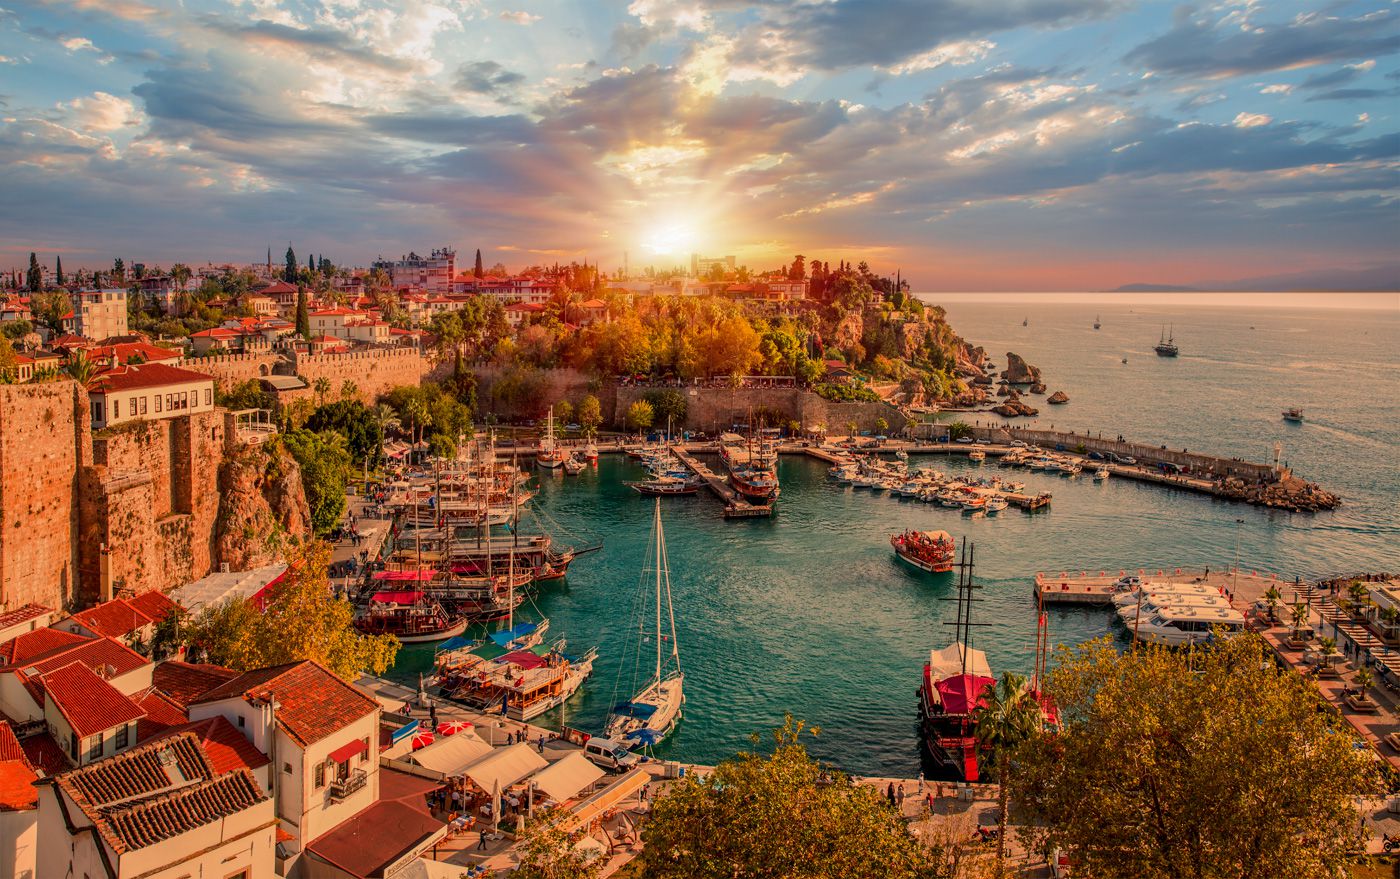 Antalya Travel Cost - Average Price of a Vacation to Antalya: Food & Meal Budget, Daily & Weekly Expenses | BudgetYourTrip.com